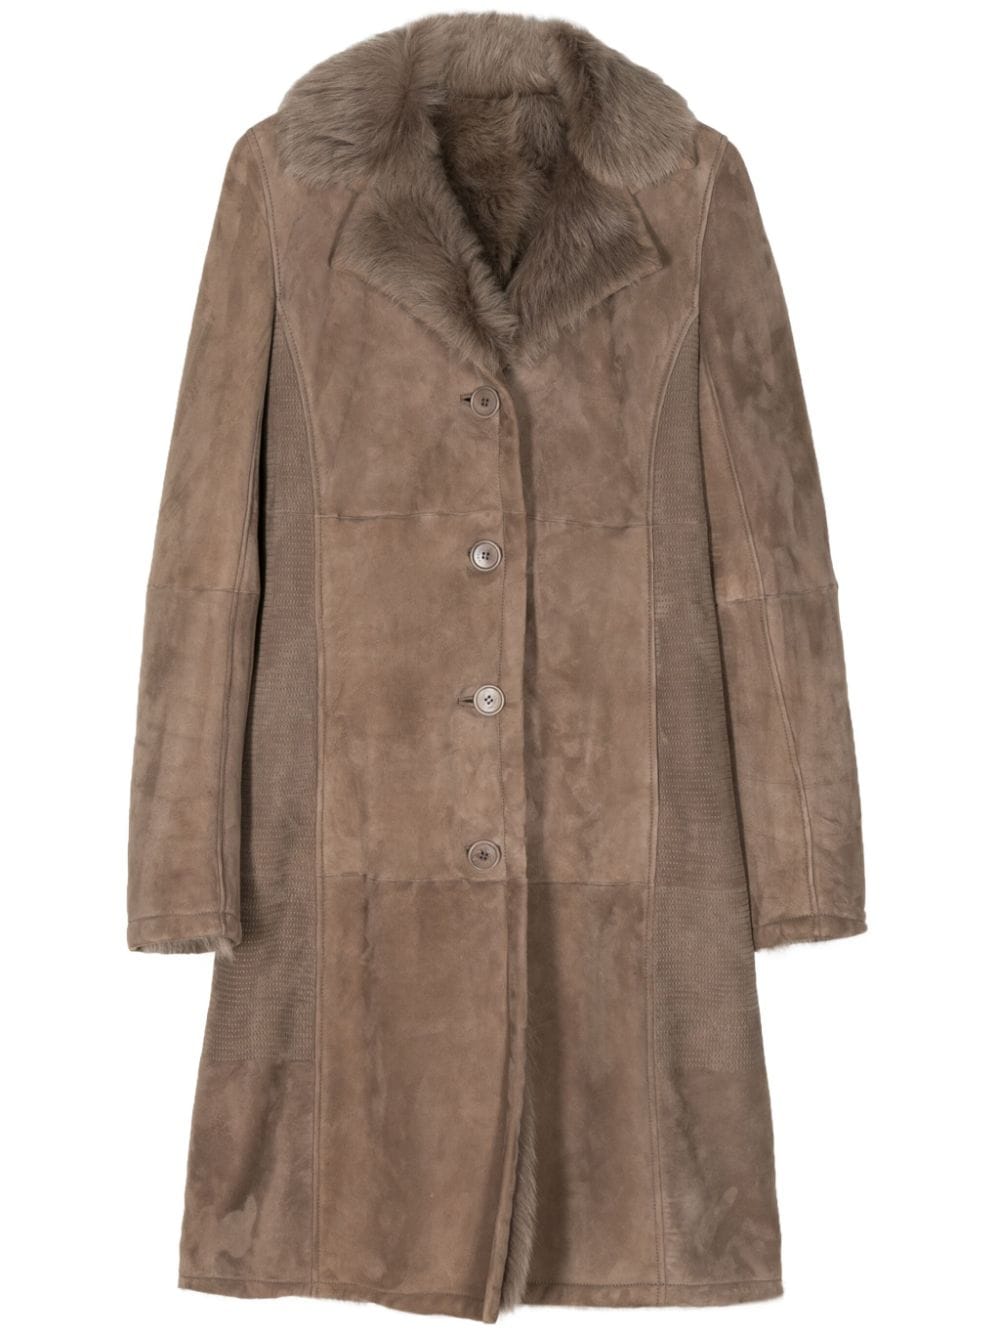 1990-2000s single-breasted shearling coat